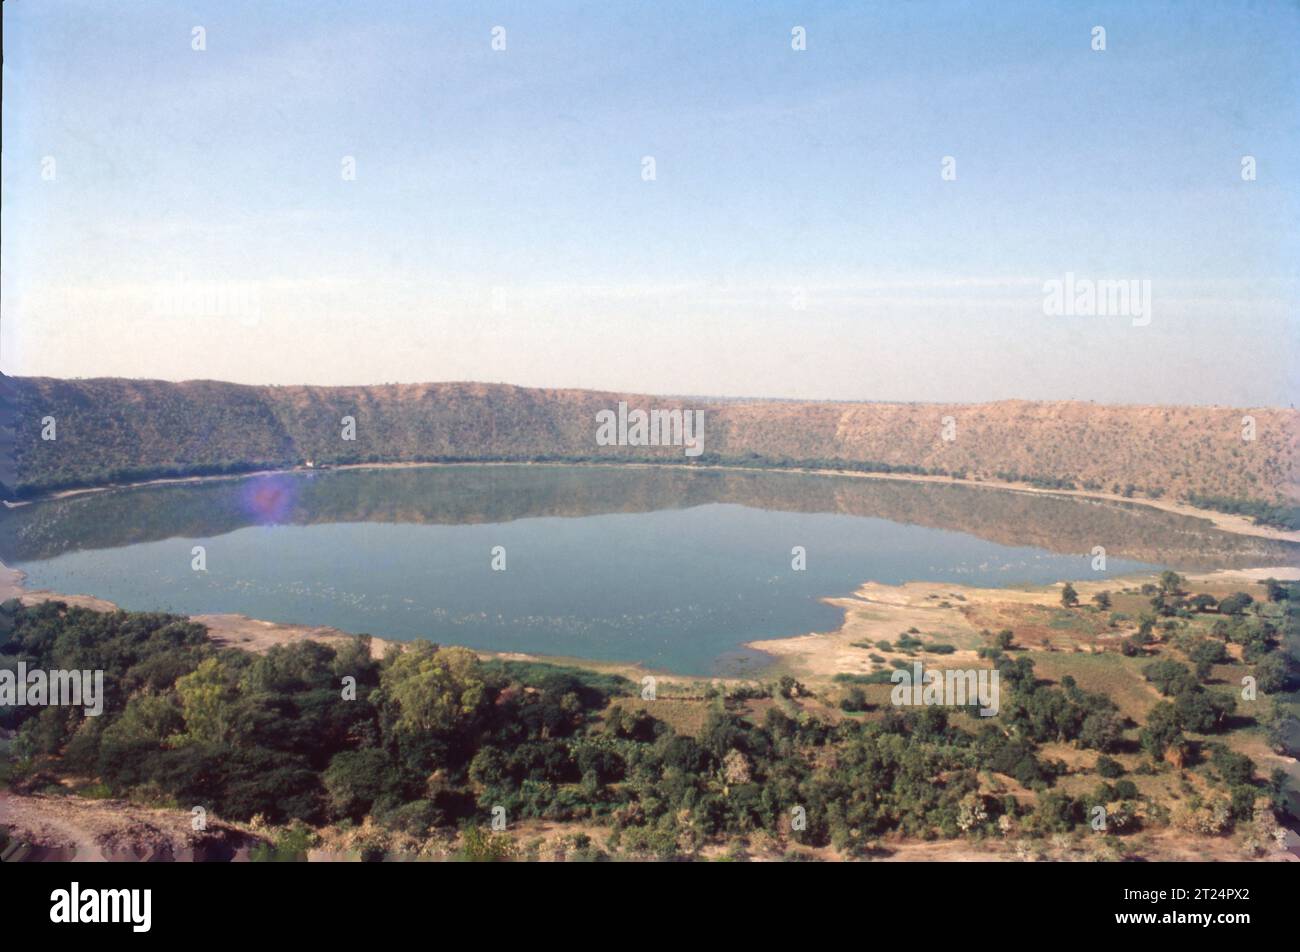 Lonar Lake, also known as Lonar crater, is a notified National Geo-heritage Monument, saline, soda lake, located at Lonar in Buldhana district, Maharashtra, India. Lonar Lake is an astrobleme created by a meteorite impact during the Pleistocene Epoch. Stock Photo